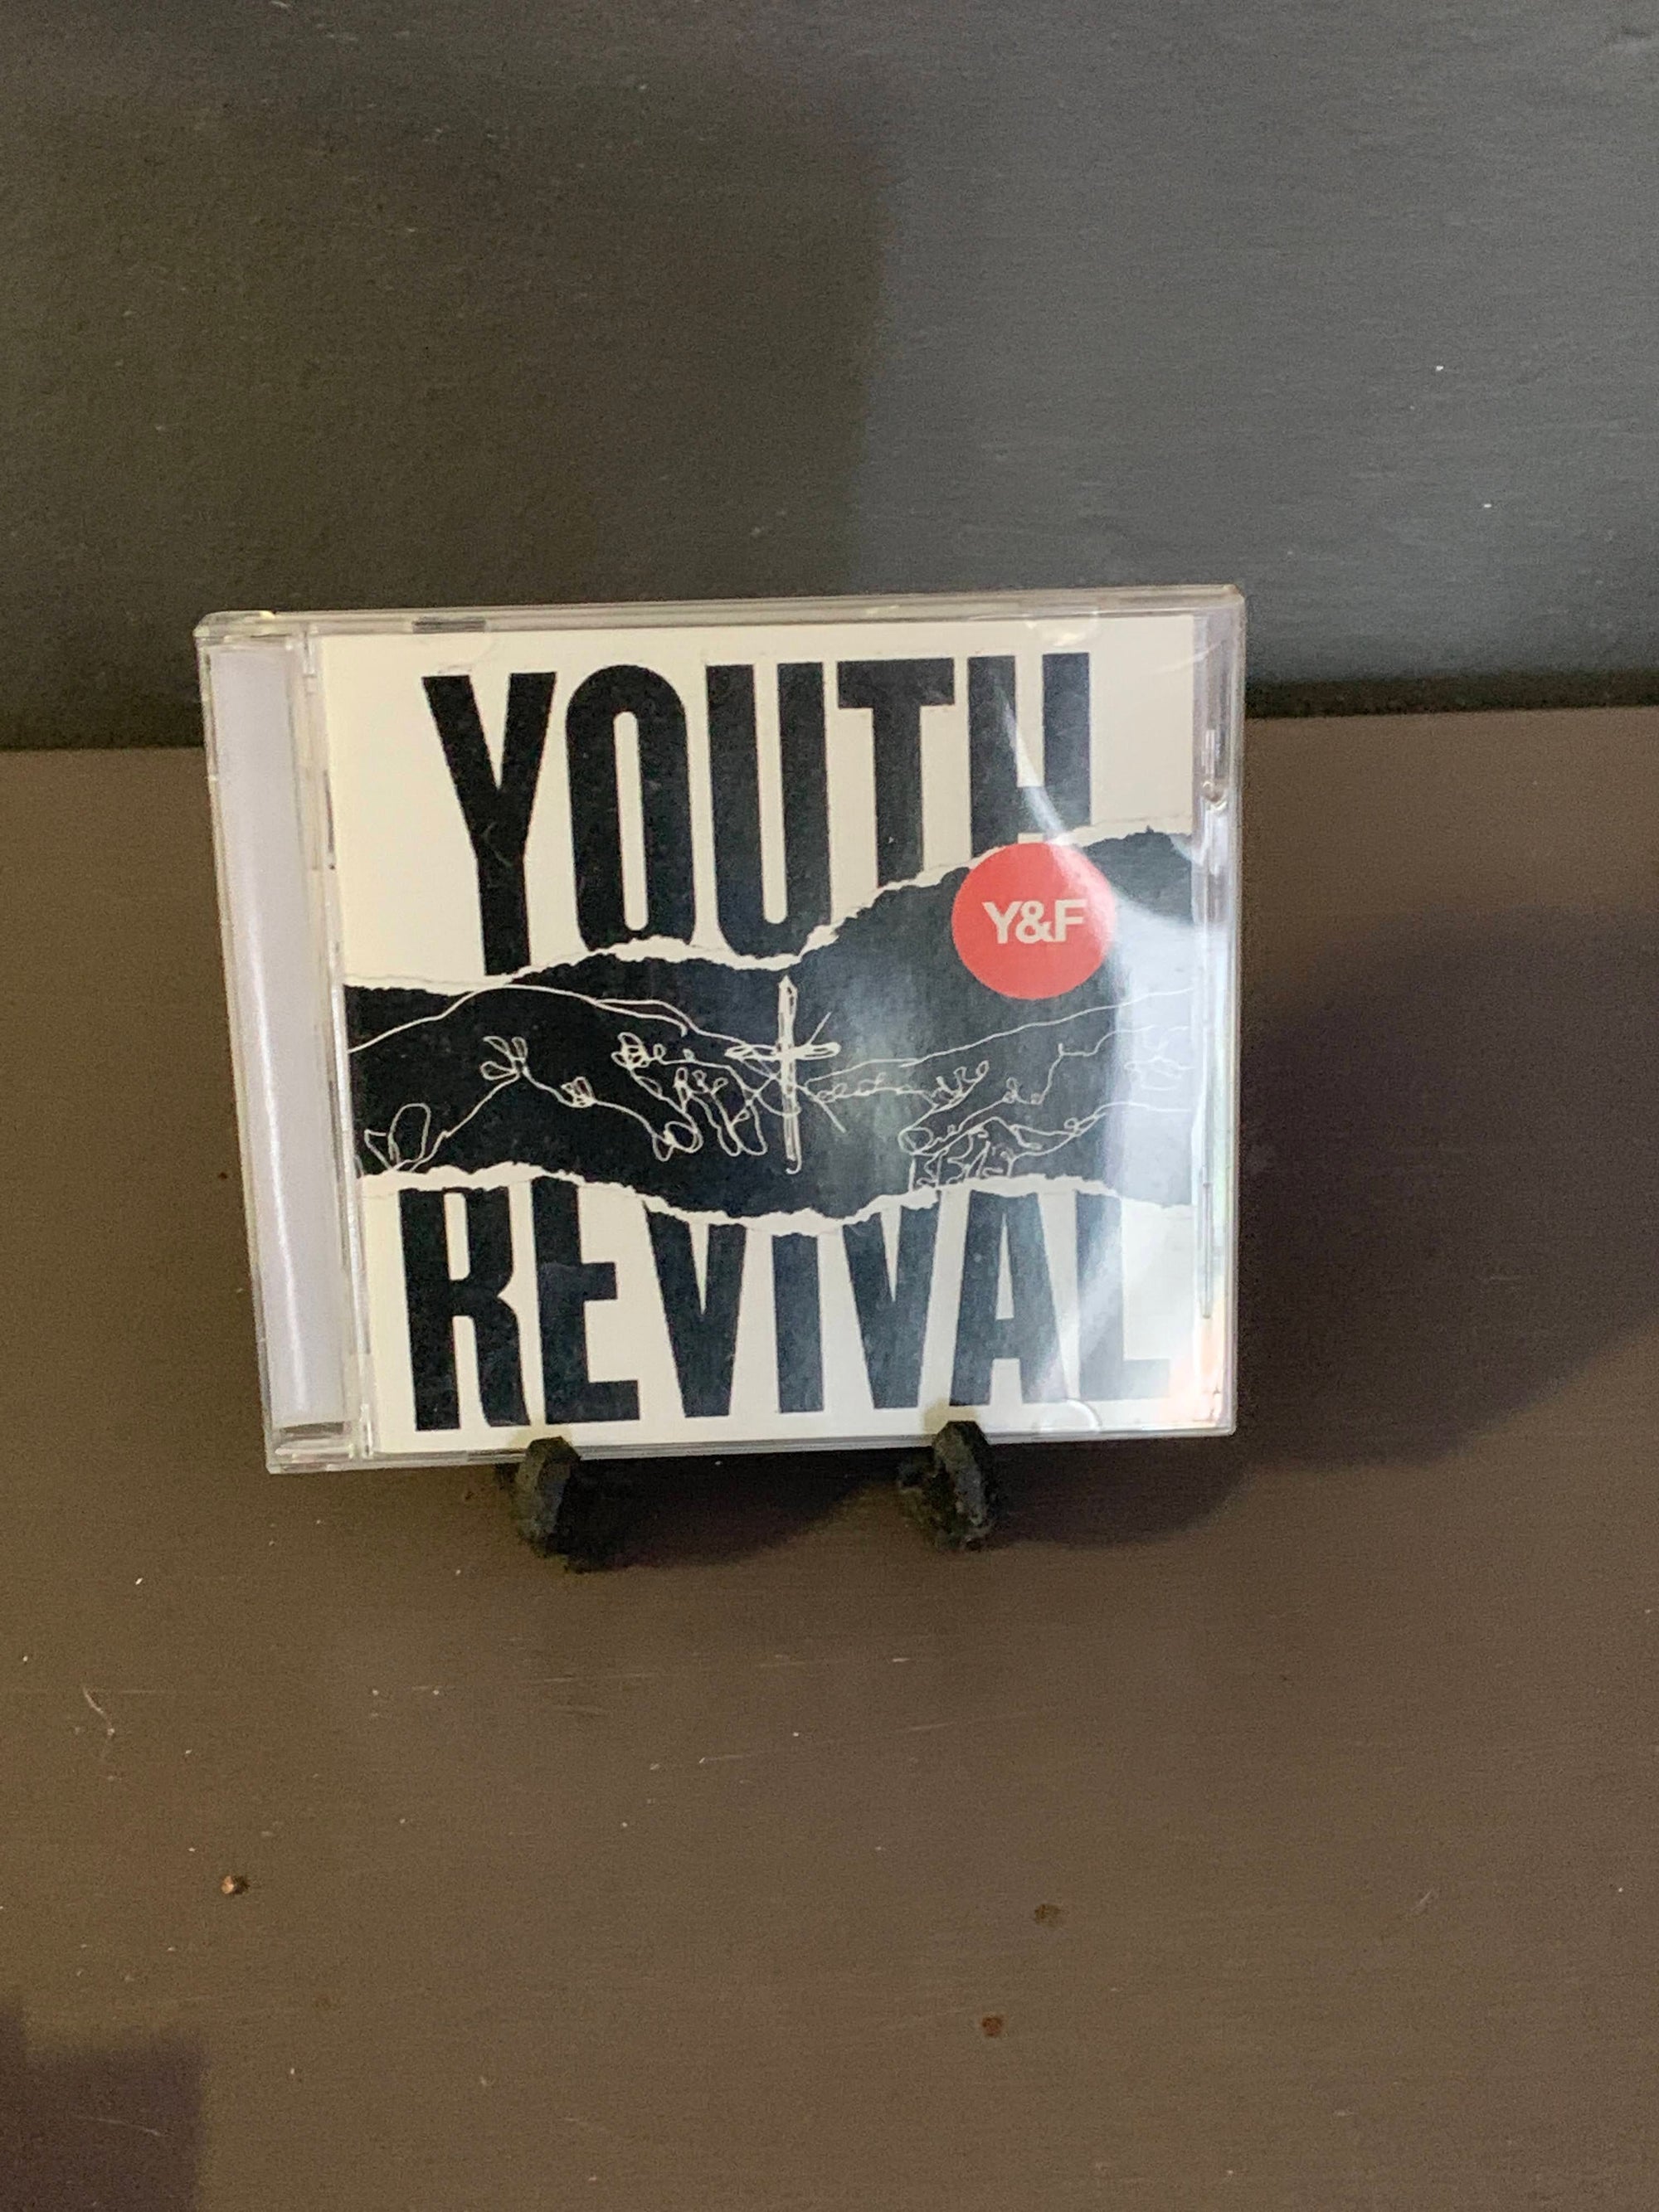 Youth revival - 2ndhandwarehouse.com